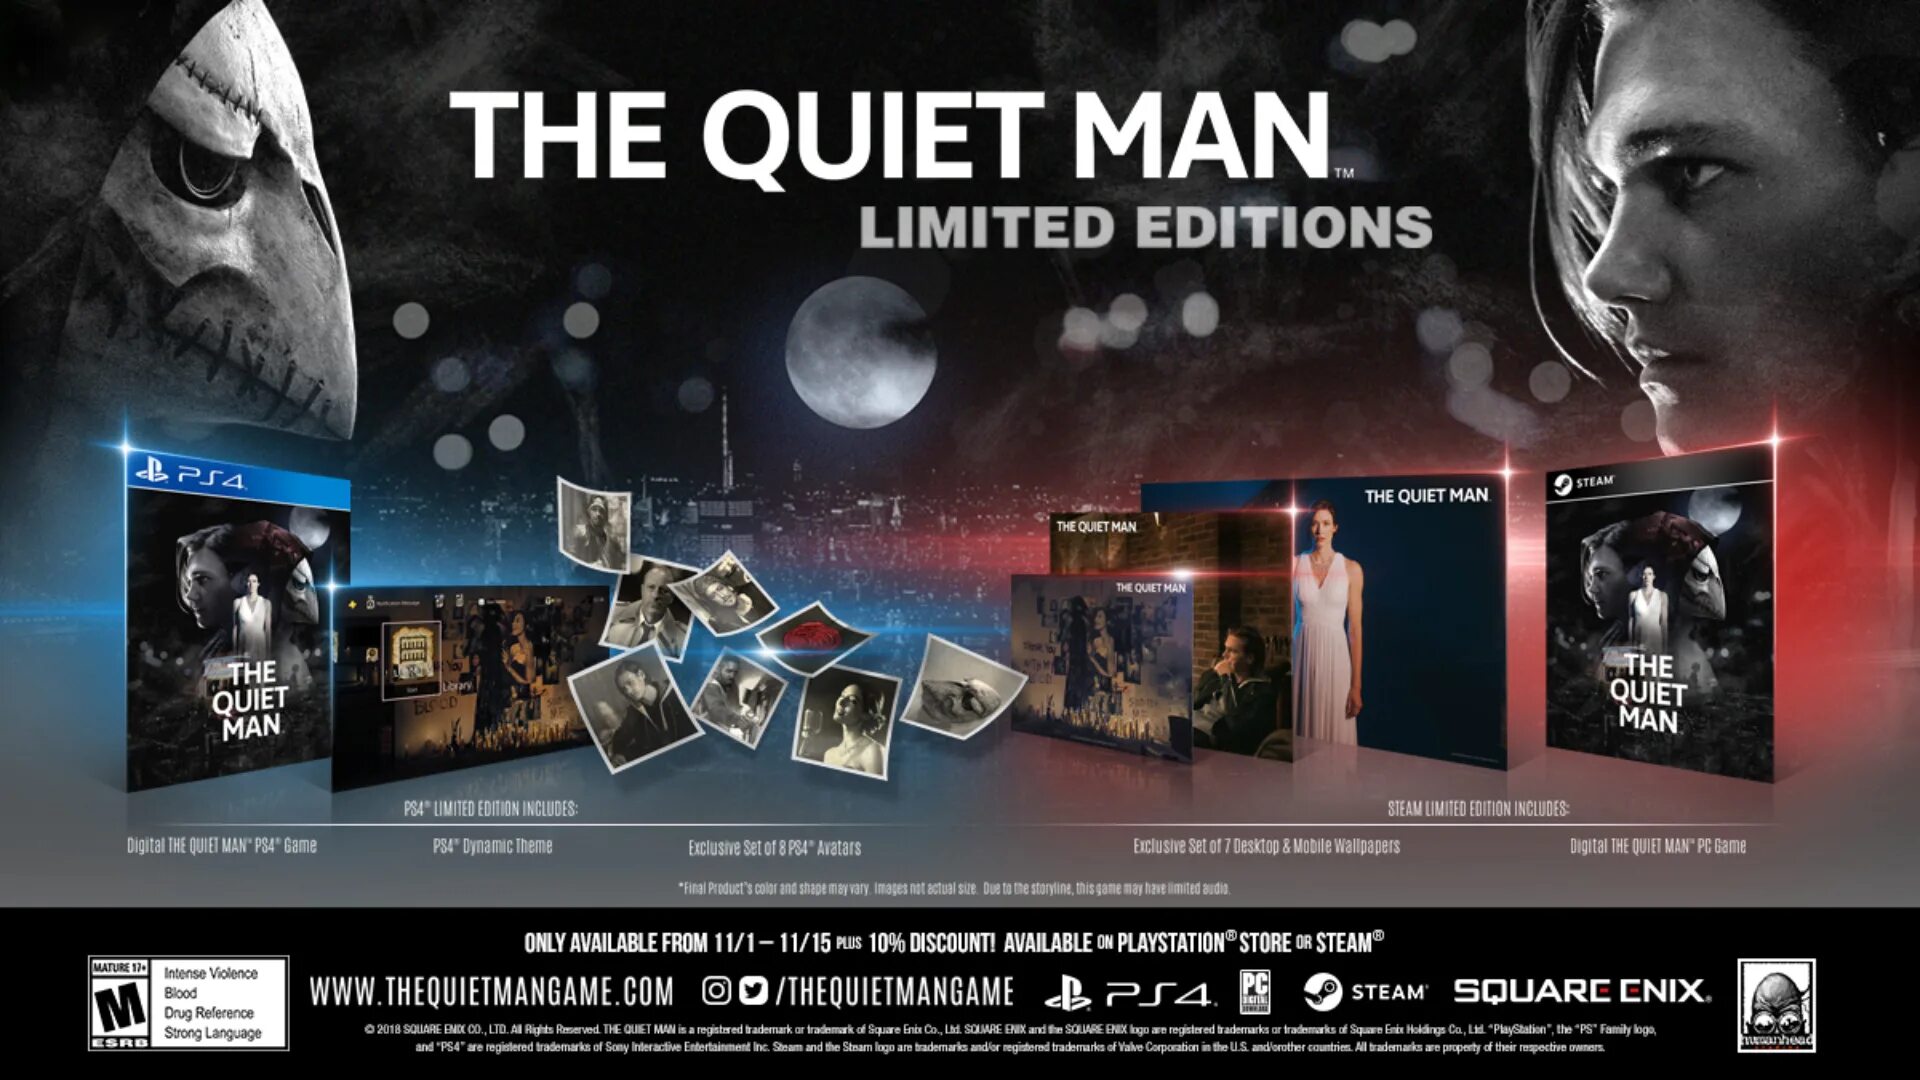 The quiet man. The quiet man (Video game). The quiet man Codex. The quiet man Лала. Quite man